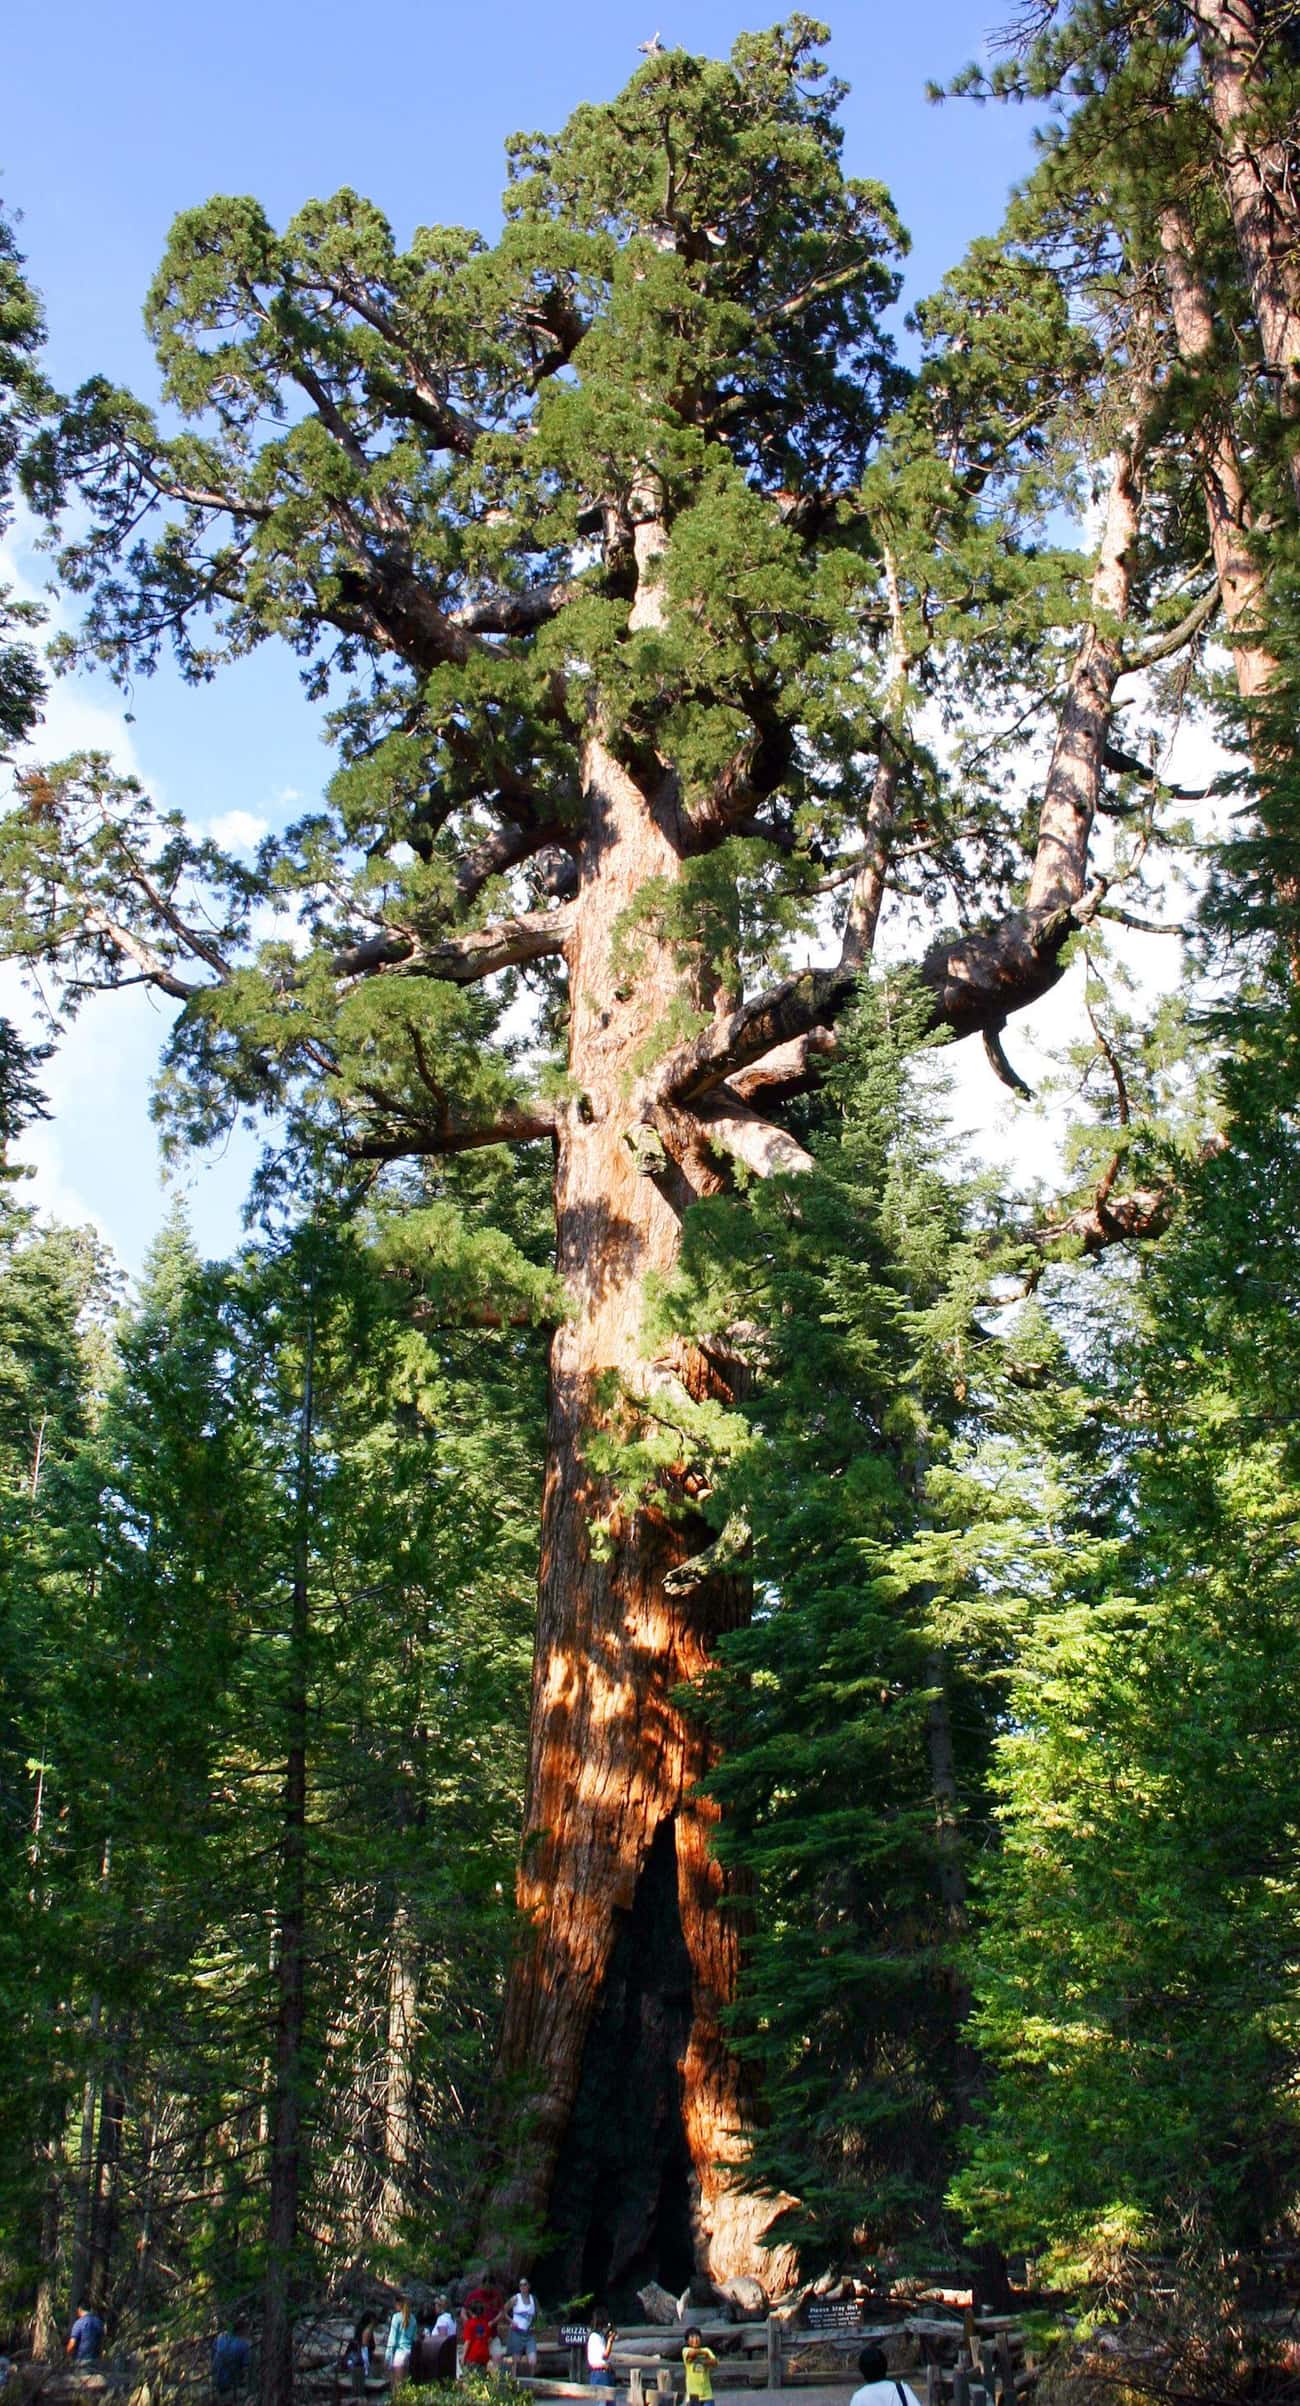 D-21, A 3,266-Year-Old Giant Sequoia